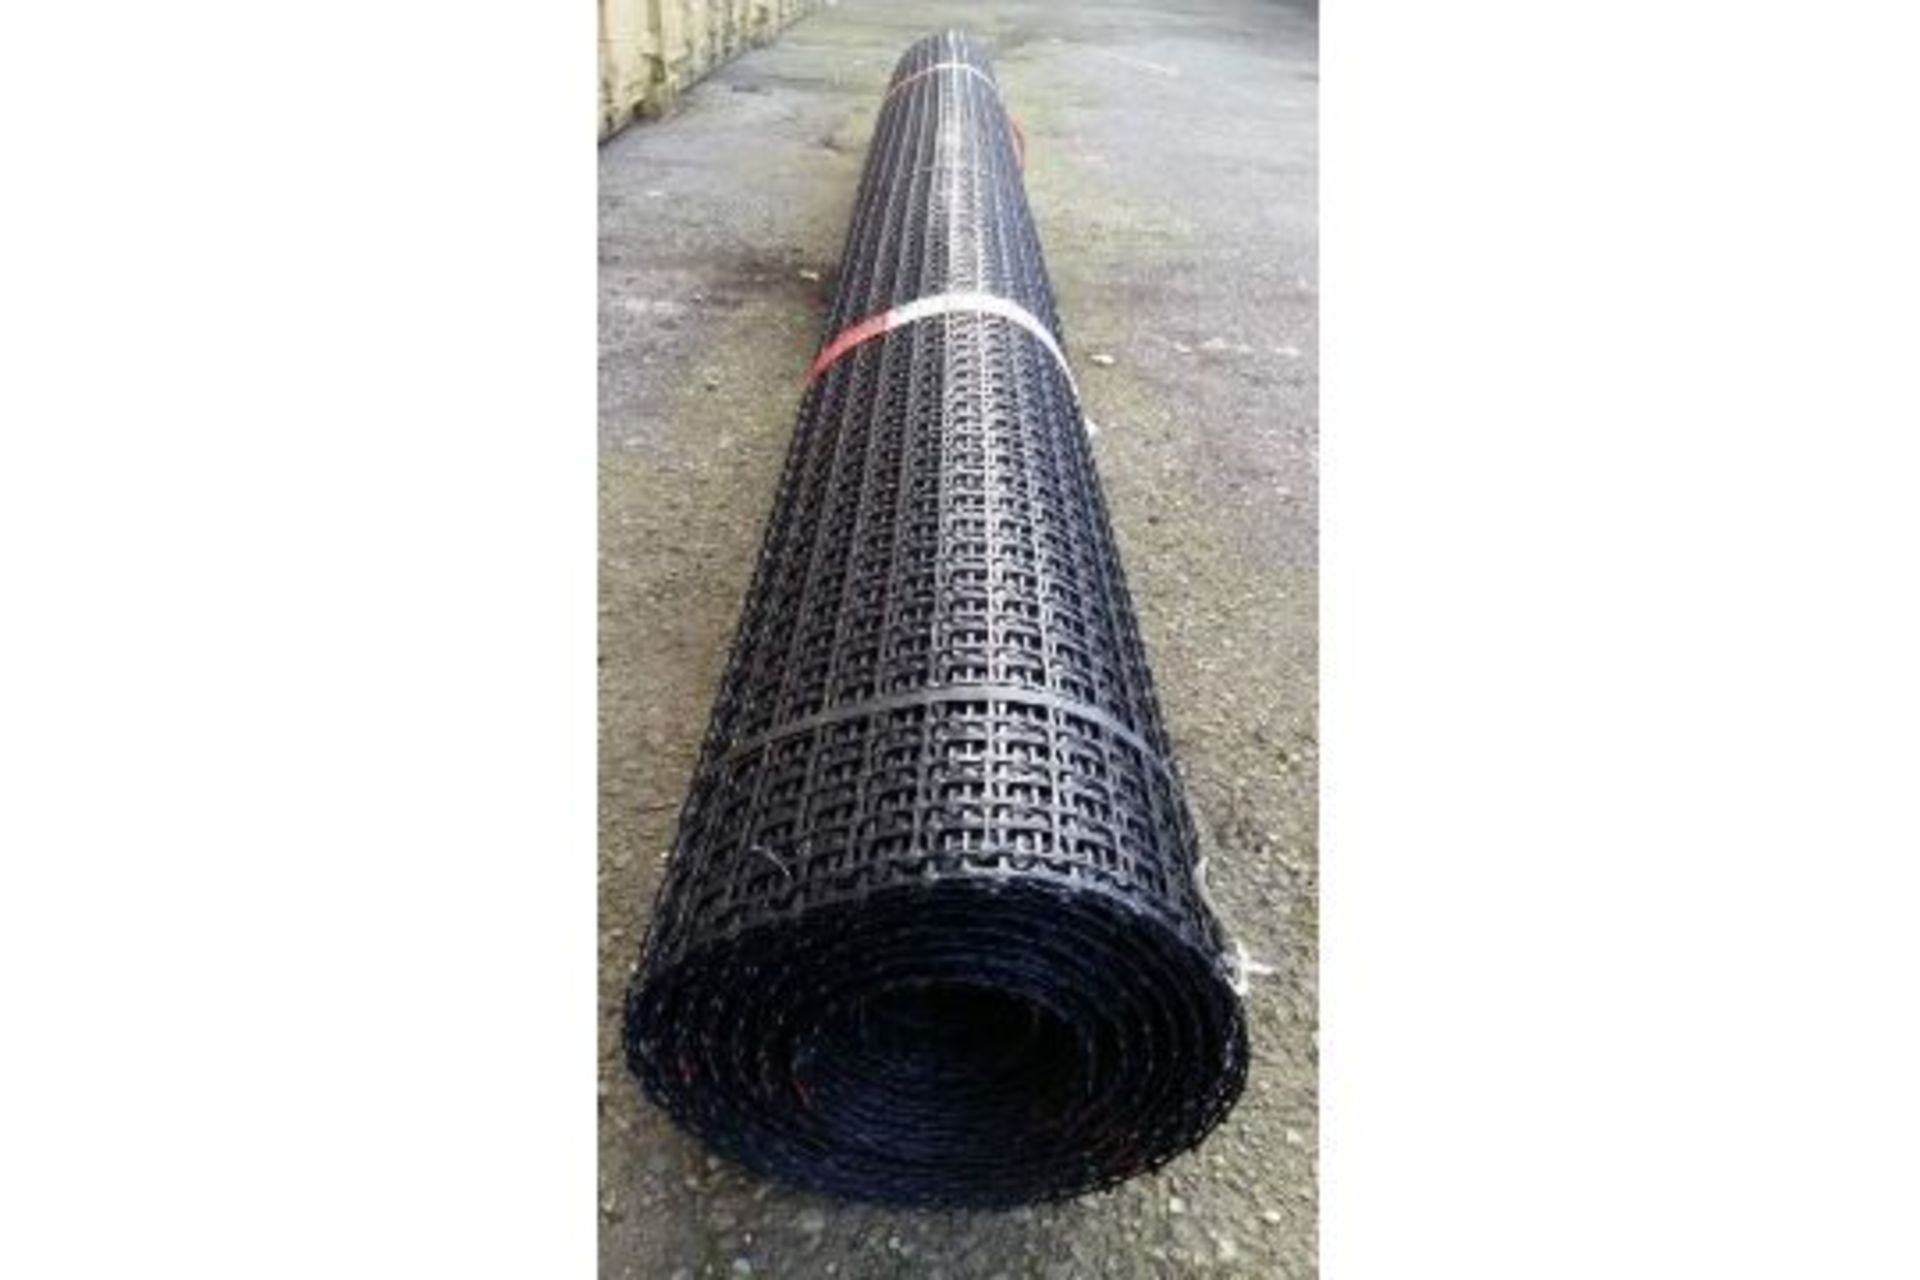 1 x UNISSUED Tensar SS20 Geogrid Ground Foundation Reinforcement Roll 4m x 75m. - Image 2 of 6